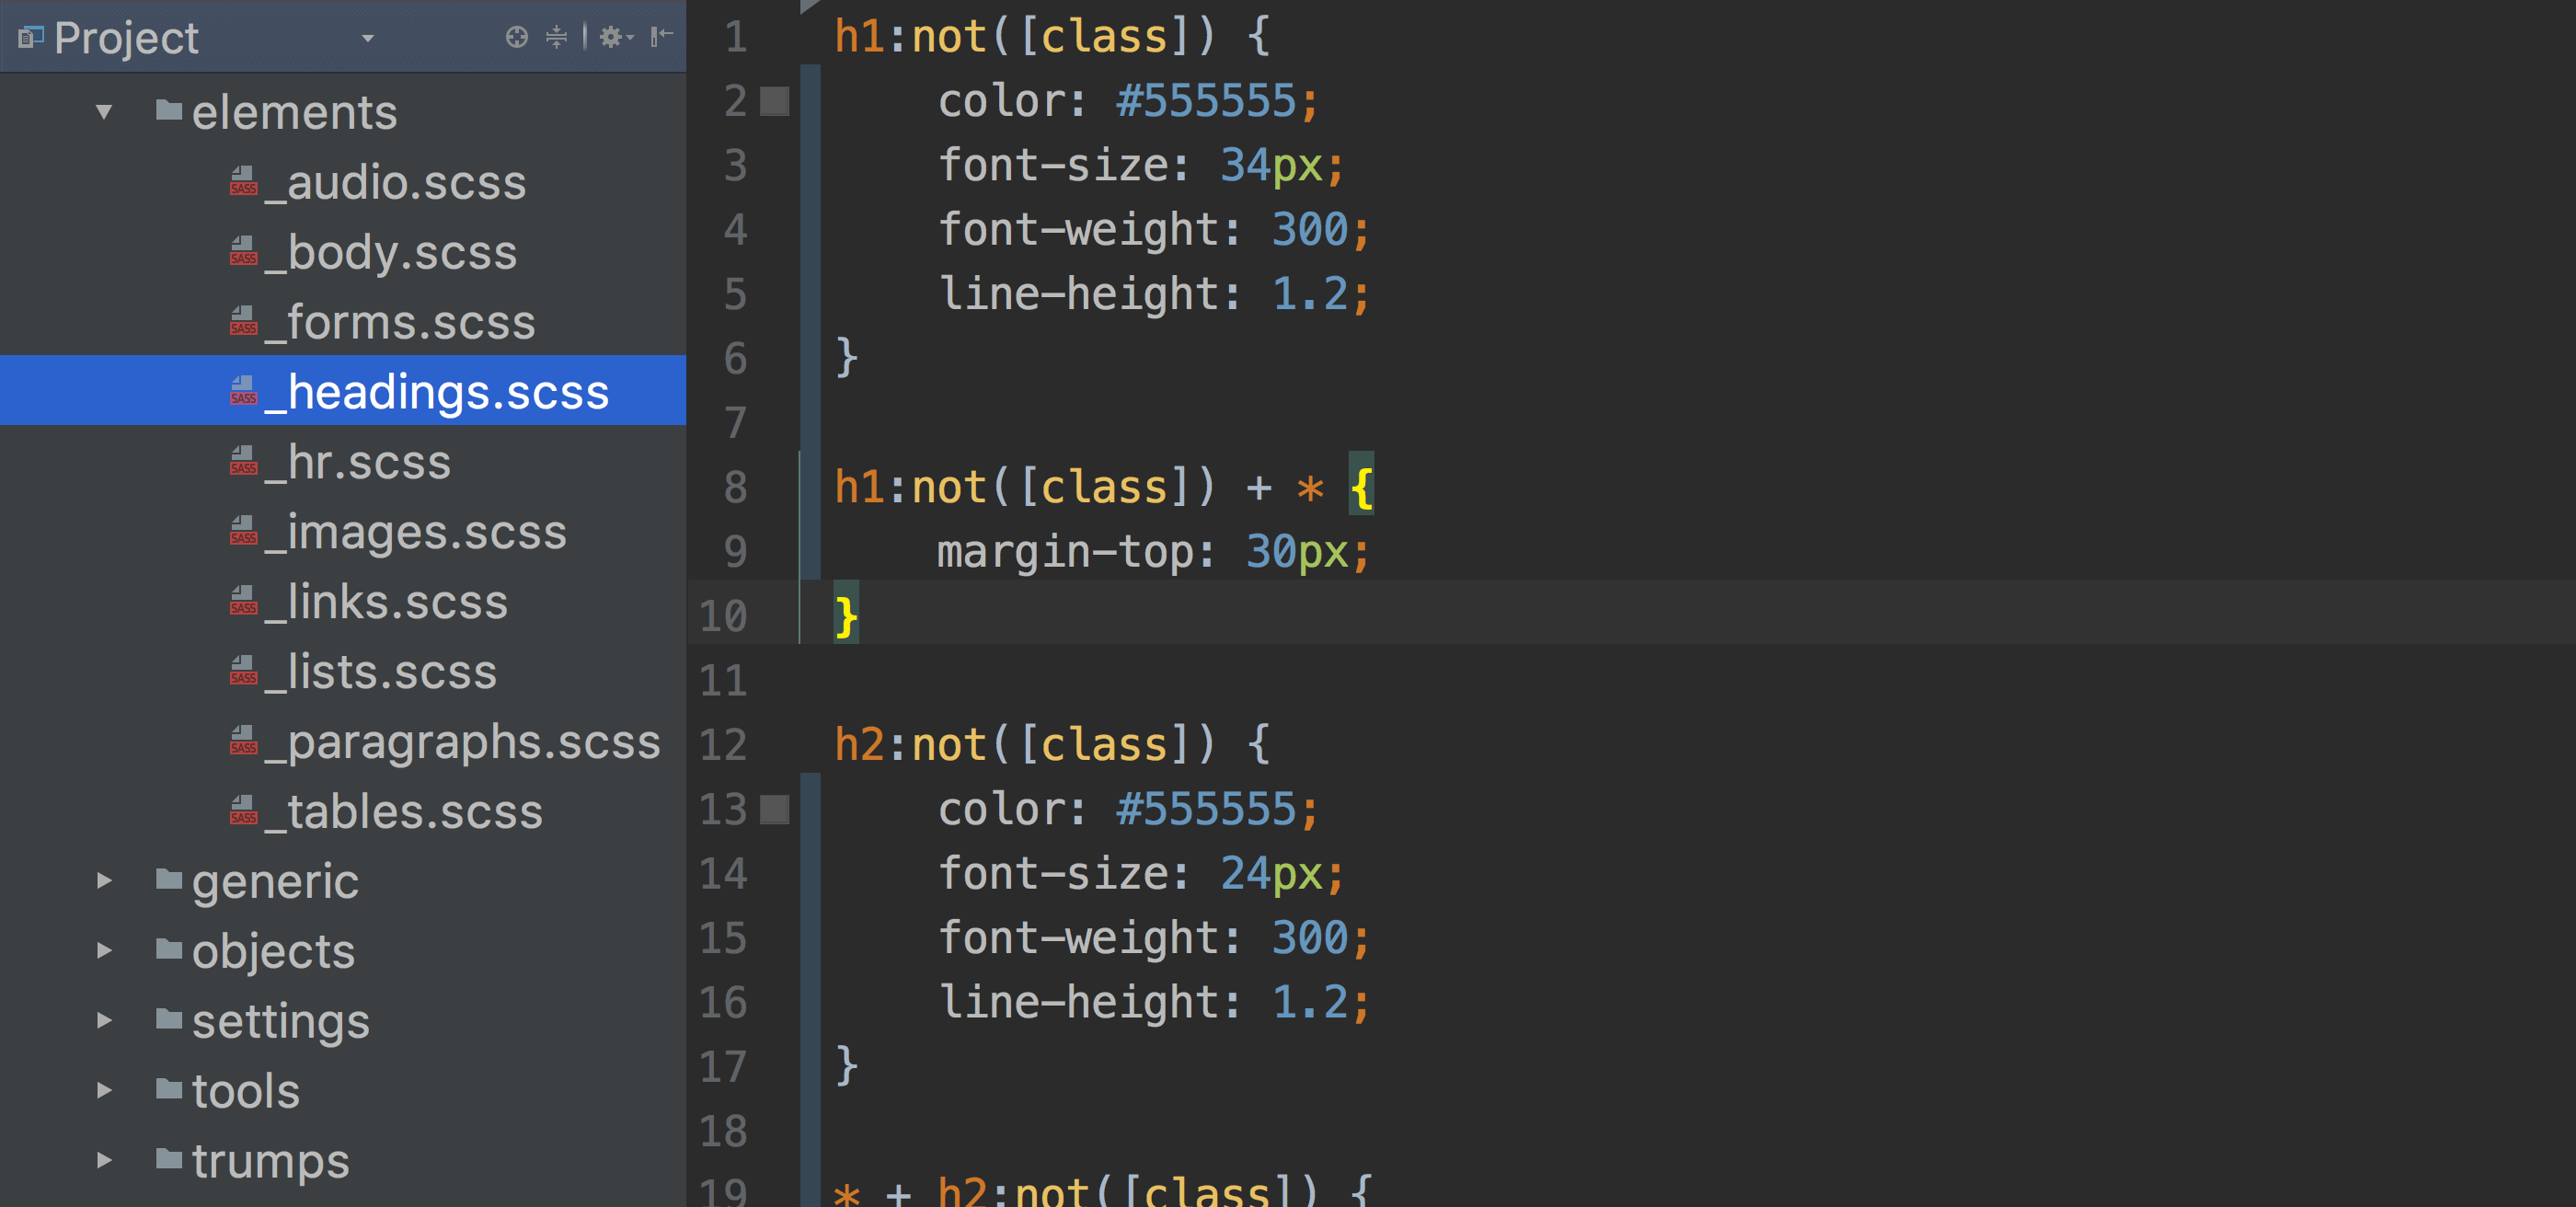 A screenshot of CSS code in an editor, showing selectors like h1:not([class])